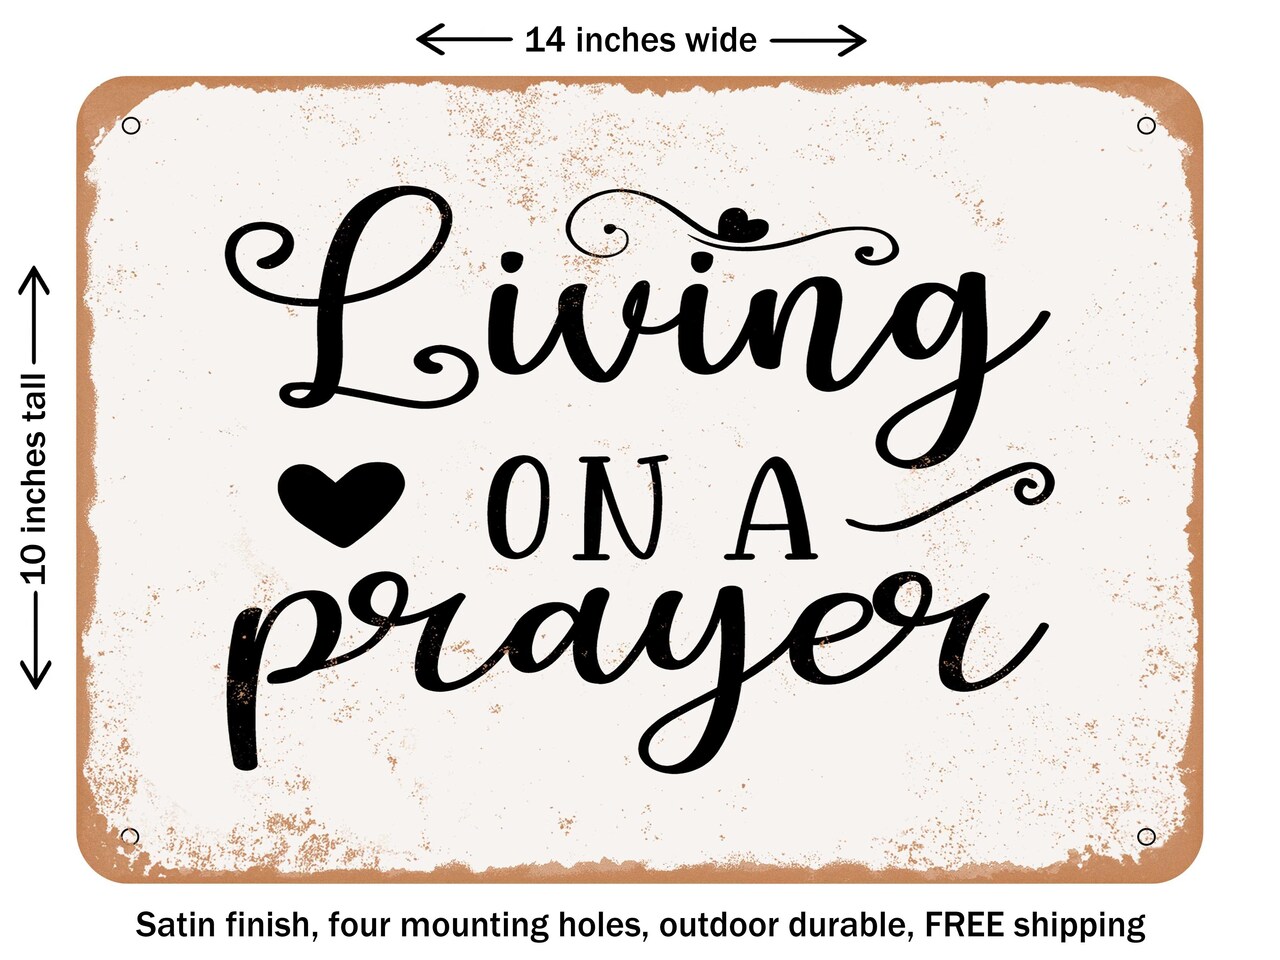 DECORATIVE METAL SIGN - Living On a Prayer - Vintage Rusty Look